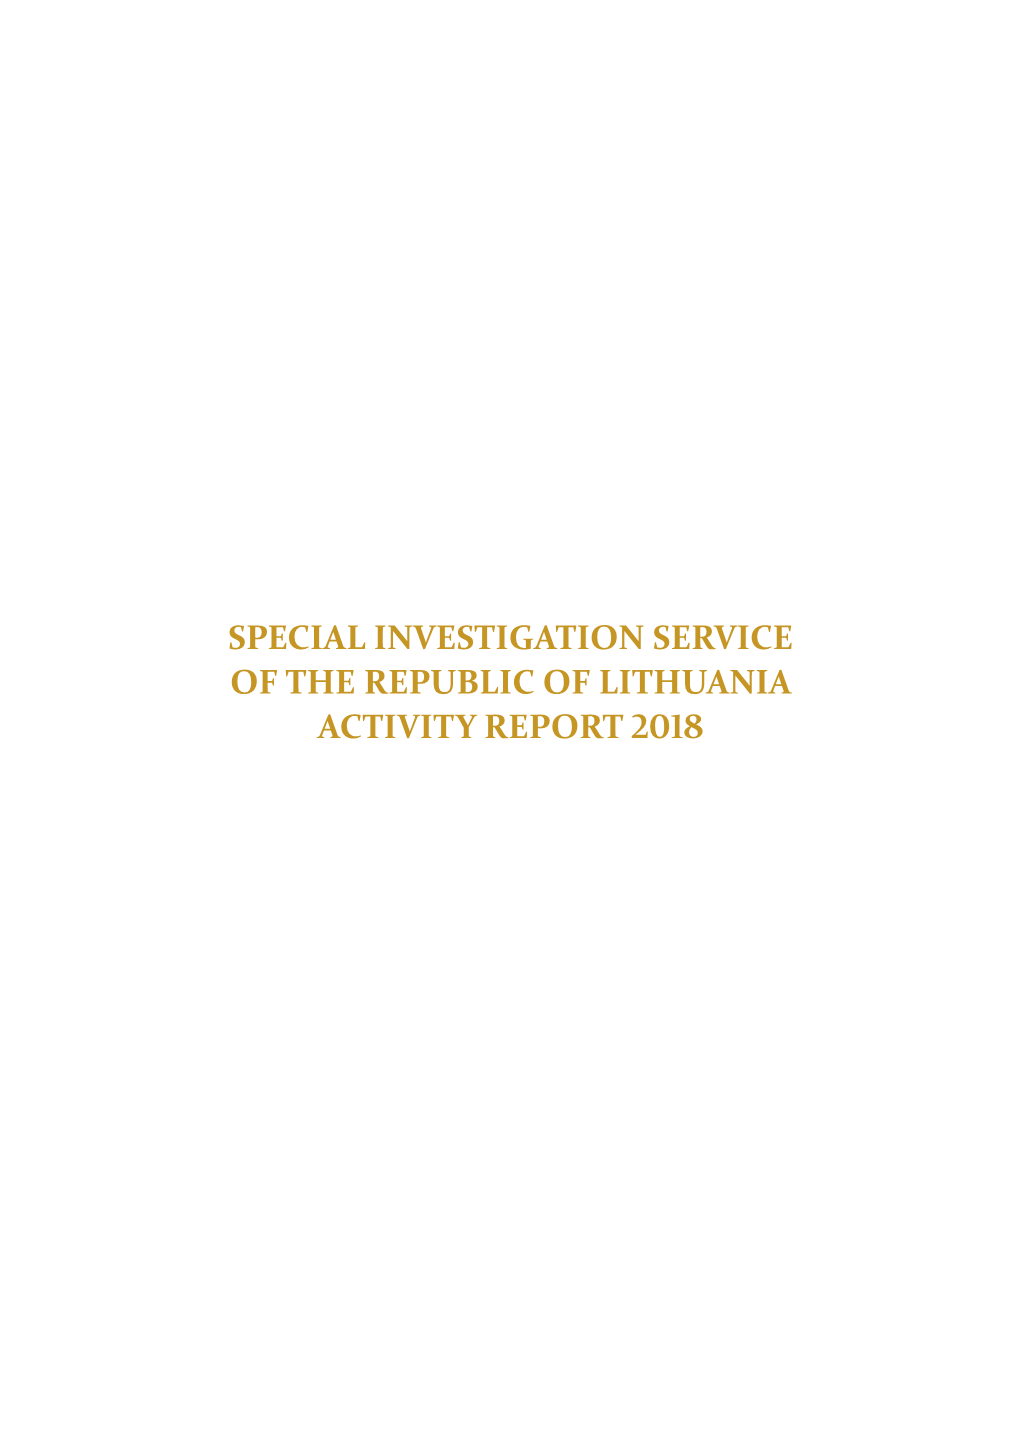 Special Investigation Service Performance Report 2018